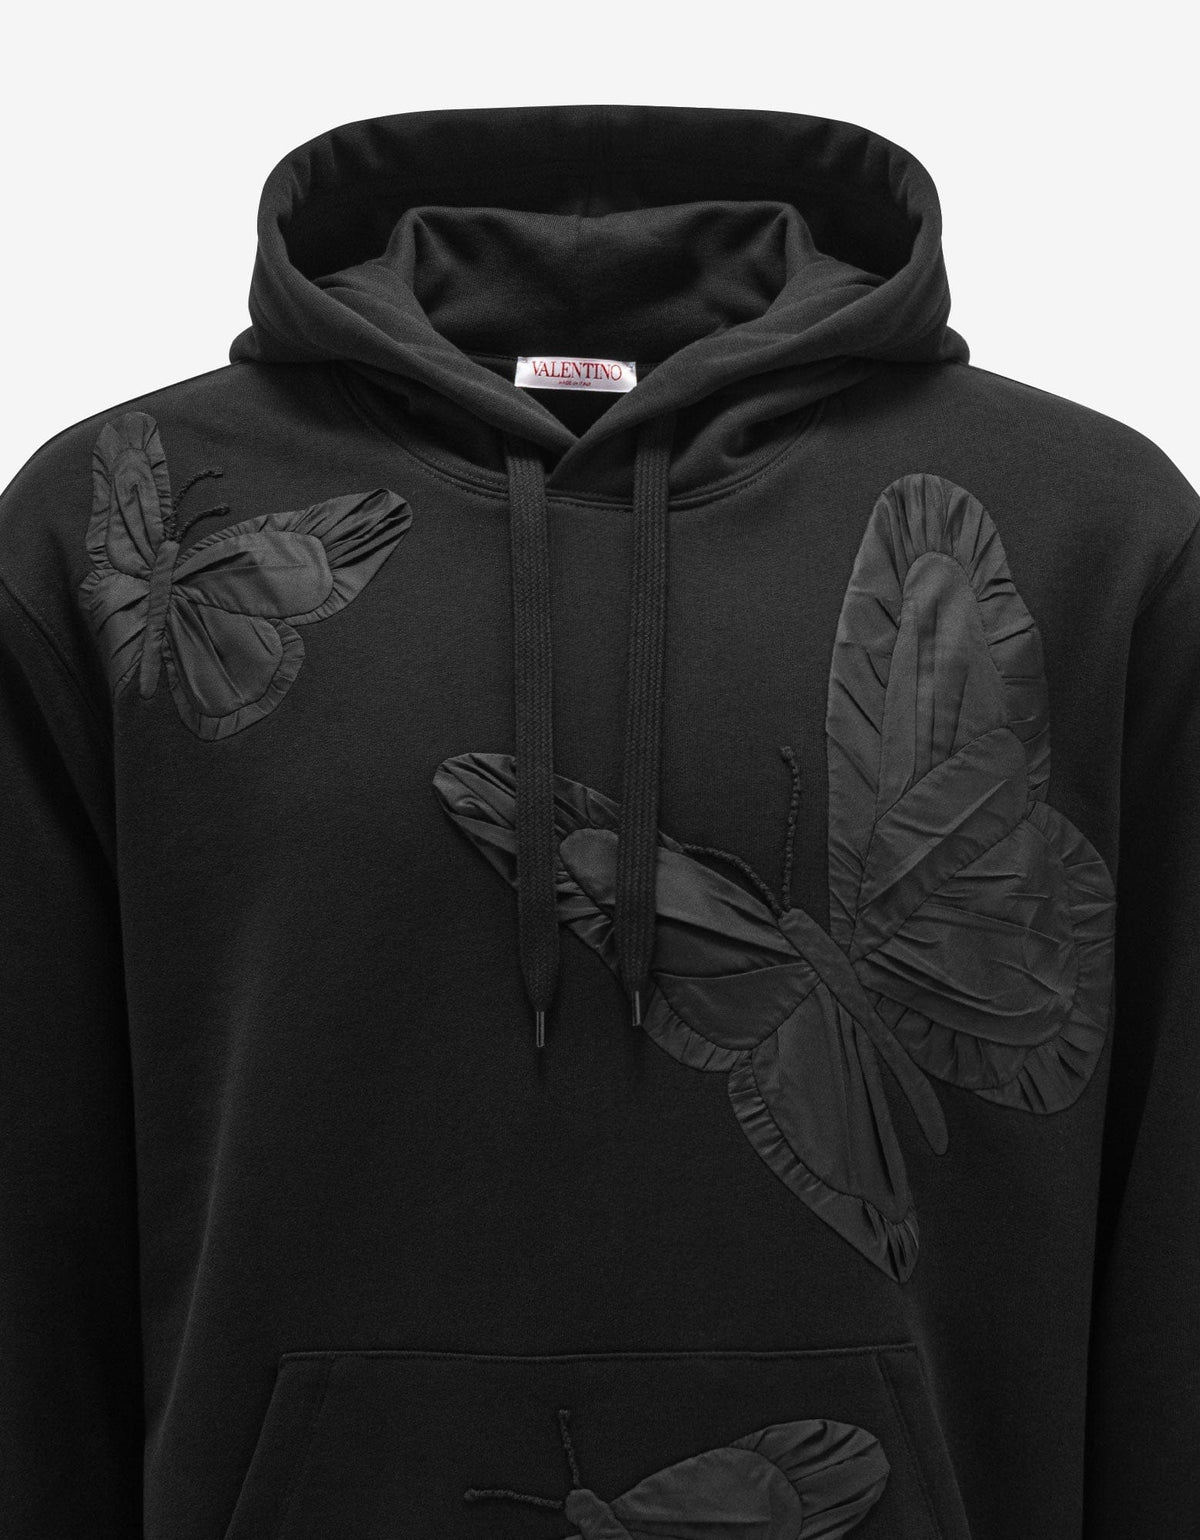 Valentino Black Butterfly Applique Hoodie